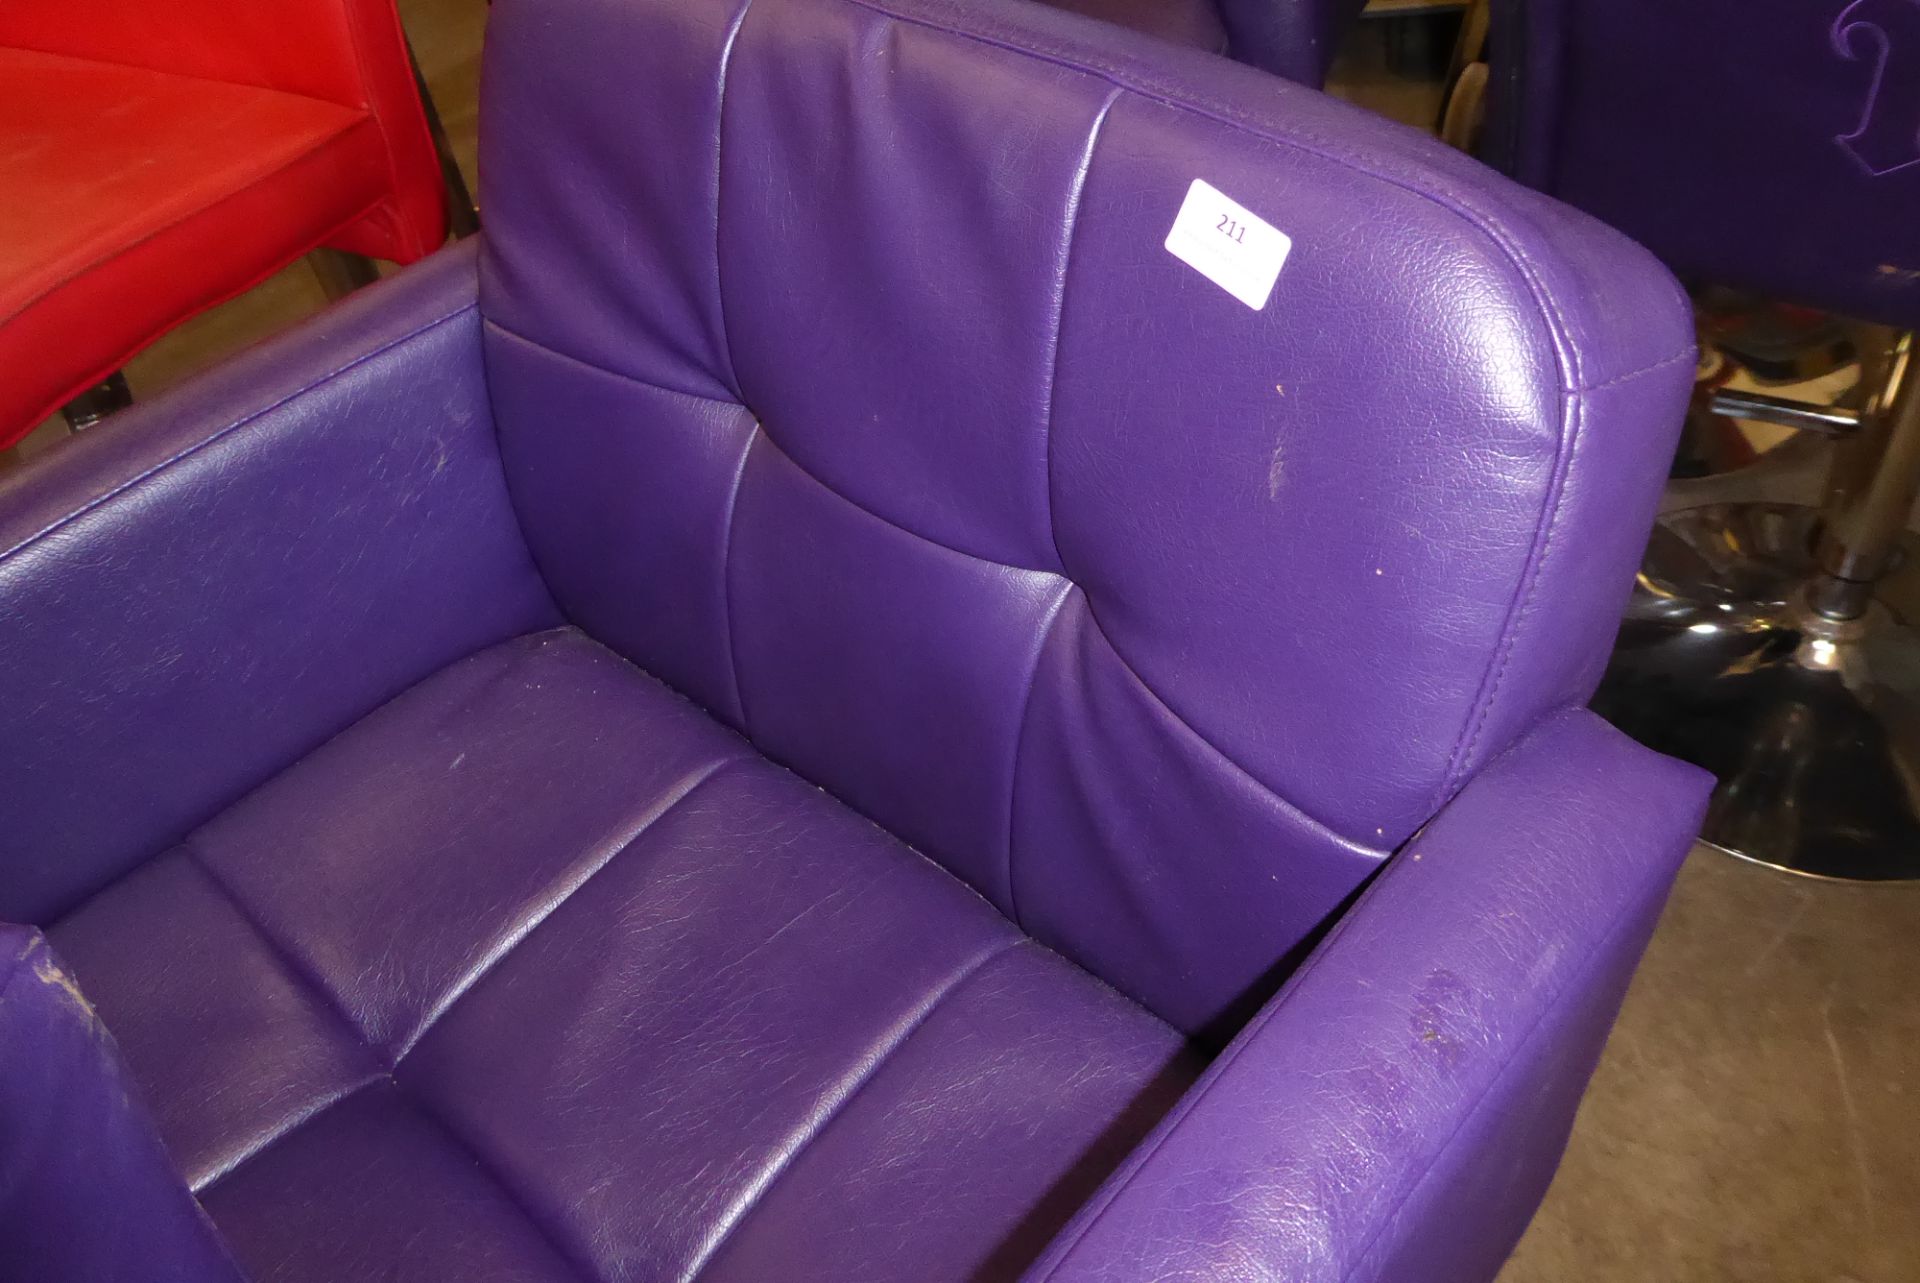 * deep purple leatherette beauticians chairs with footrest and chrome base